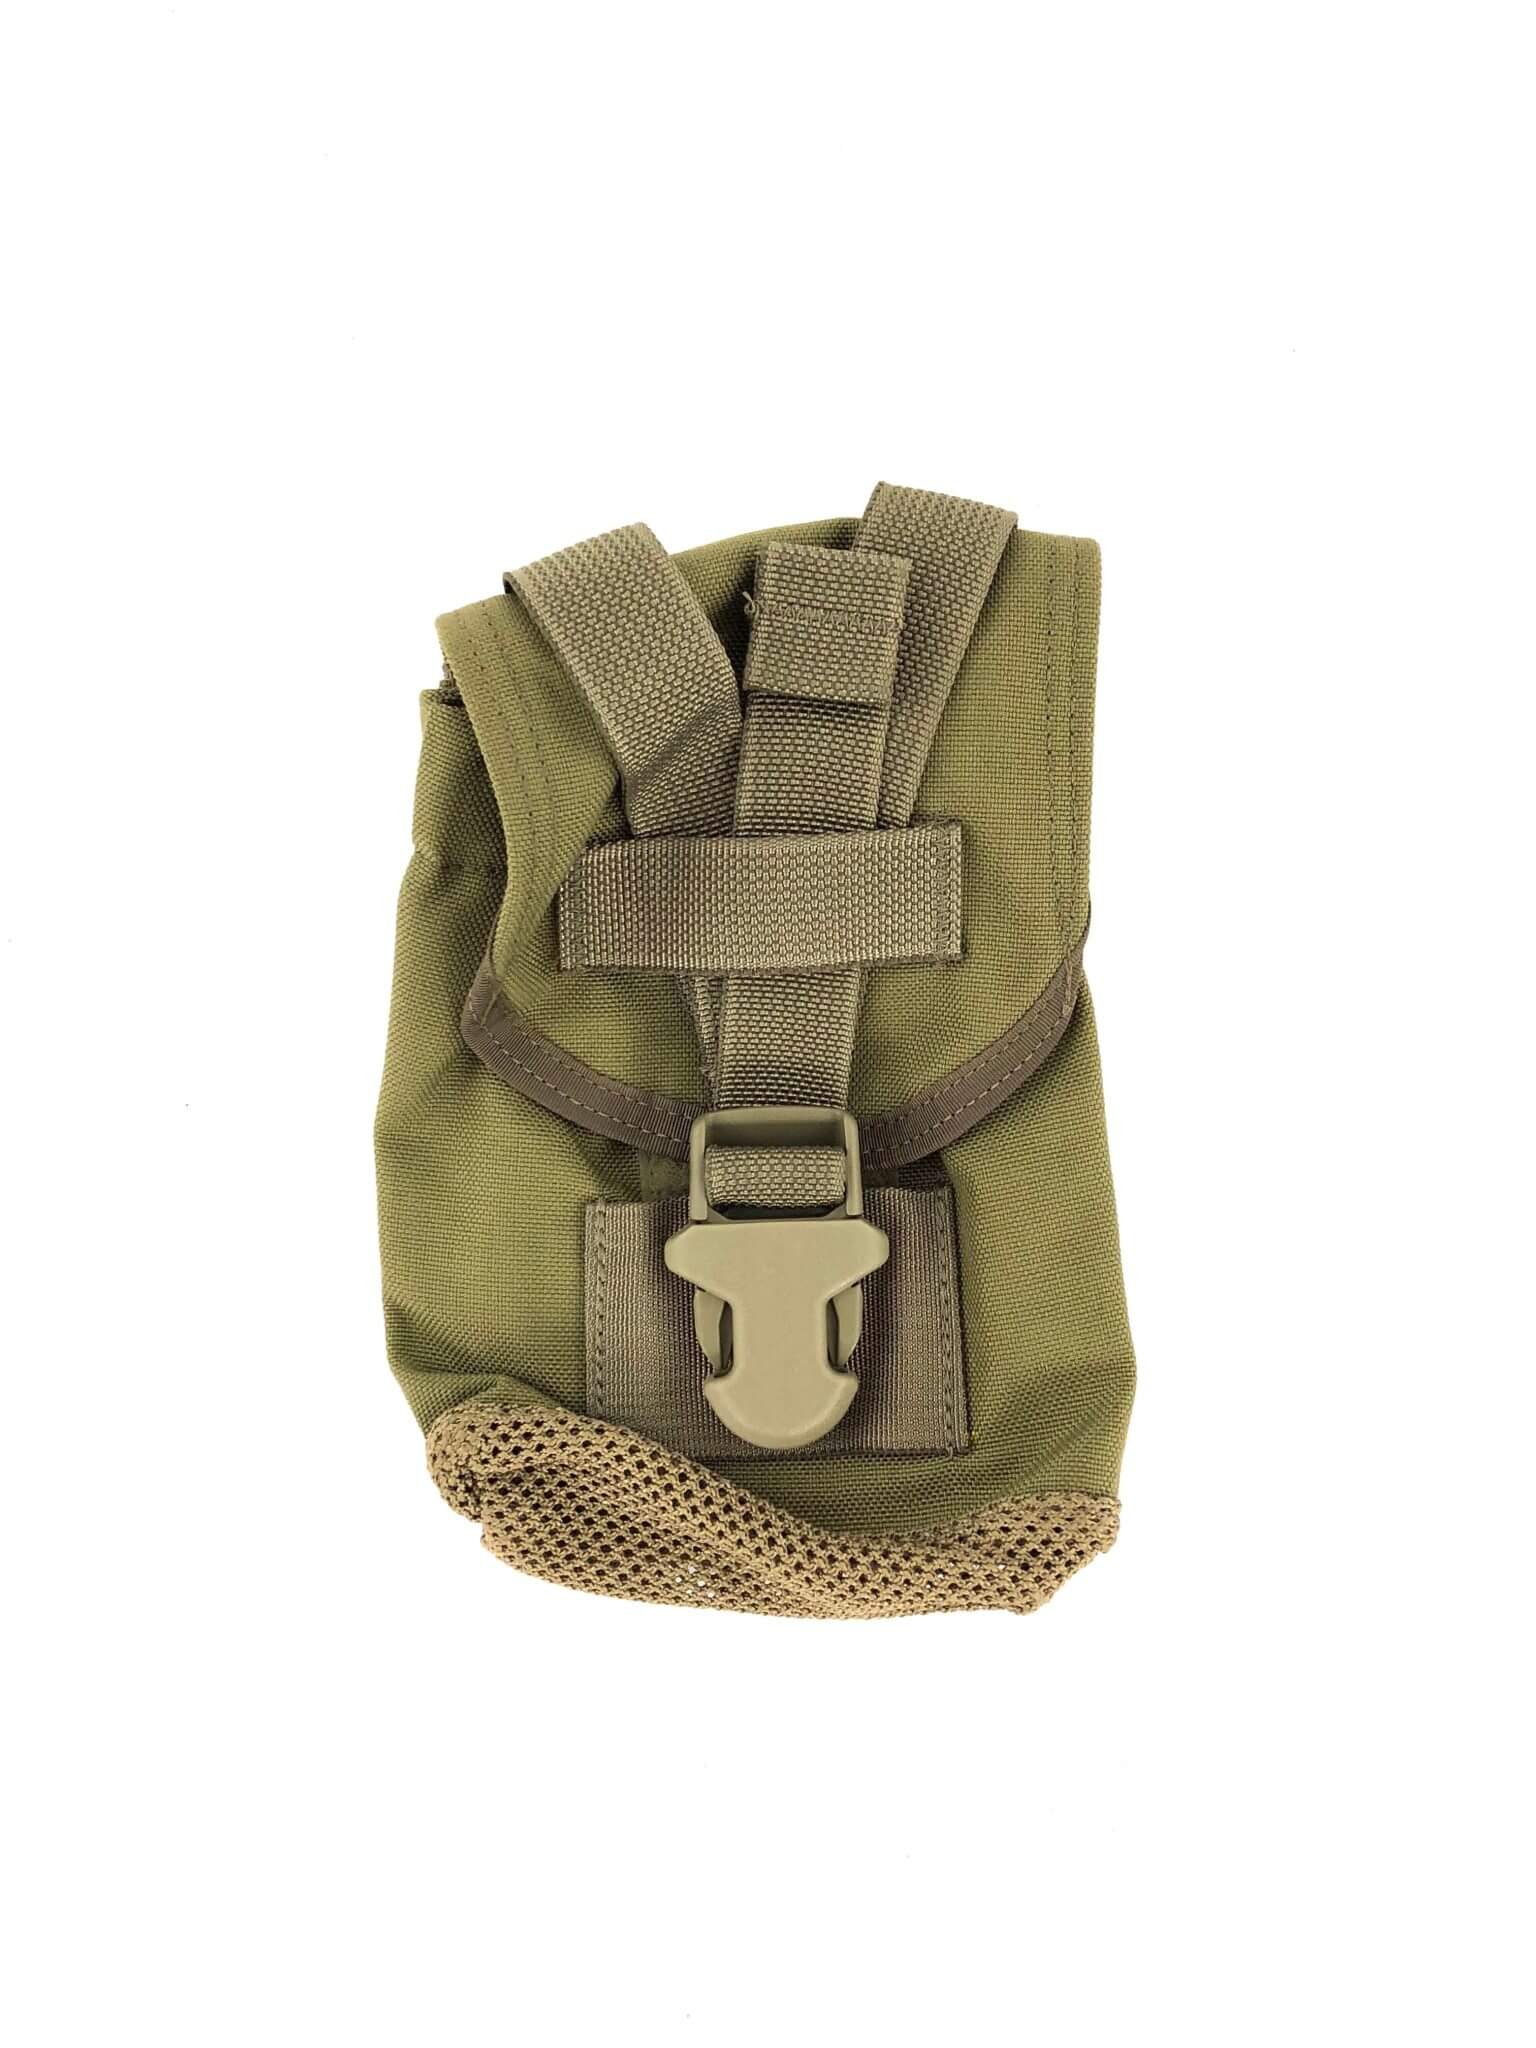 NEW Eagle Industries Canteen/GP V Pouch Multicam CTP-1L/NG-RF/D-MS-5CCA 